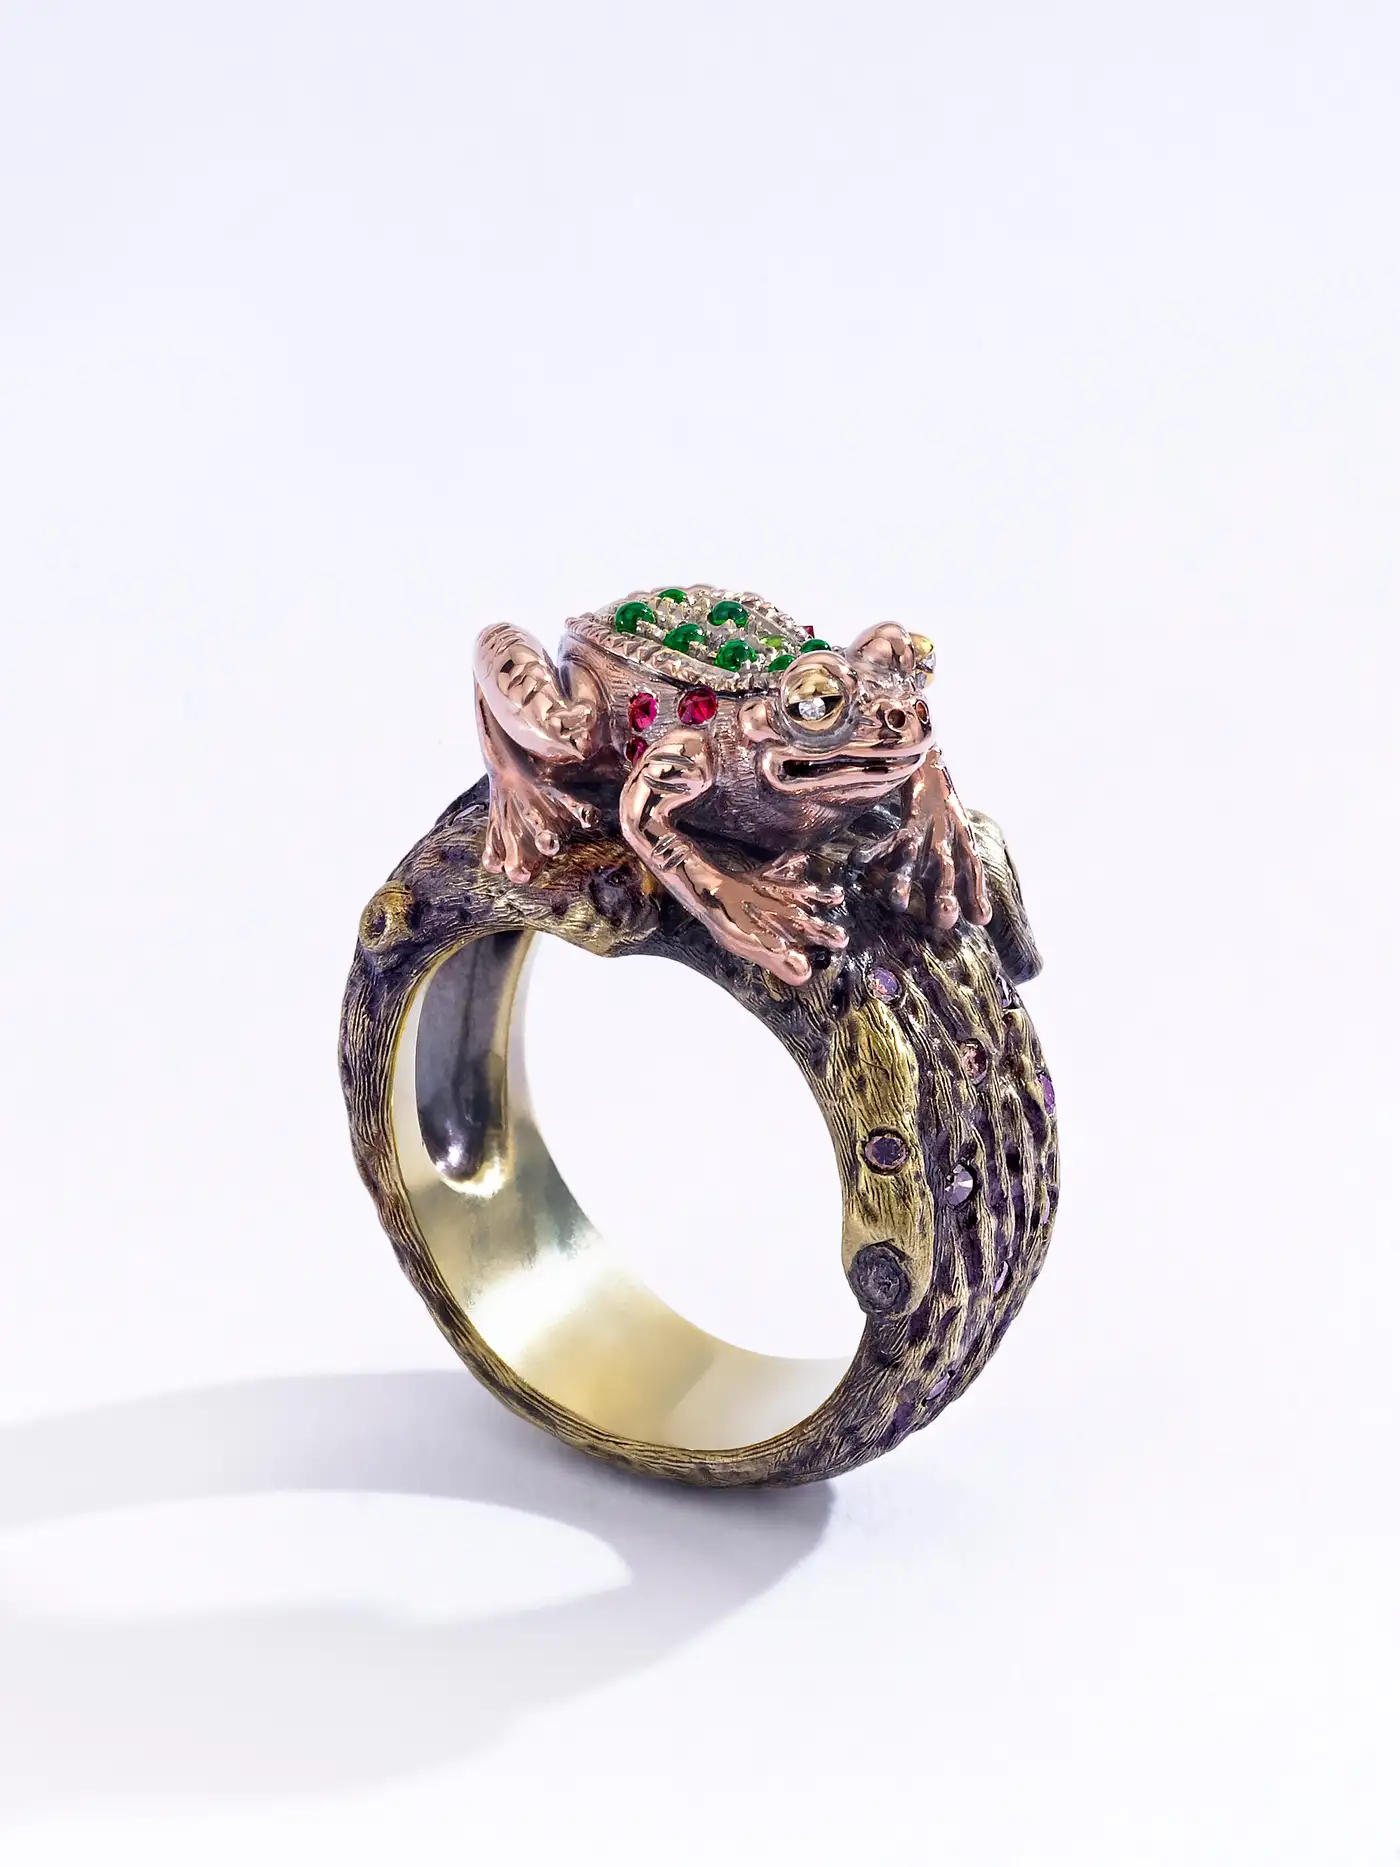 Wendy-Brandes-7-Ring-Diamond-and-Coloured-Gemstone-Animal-Design-Collection-20.webp